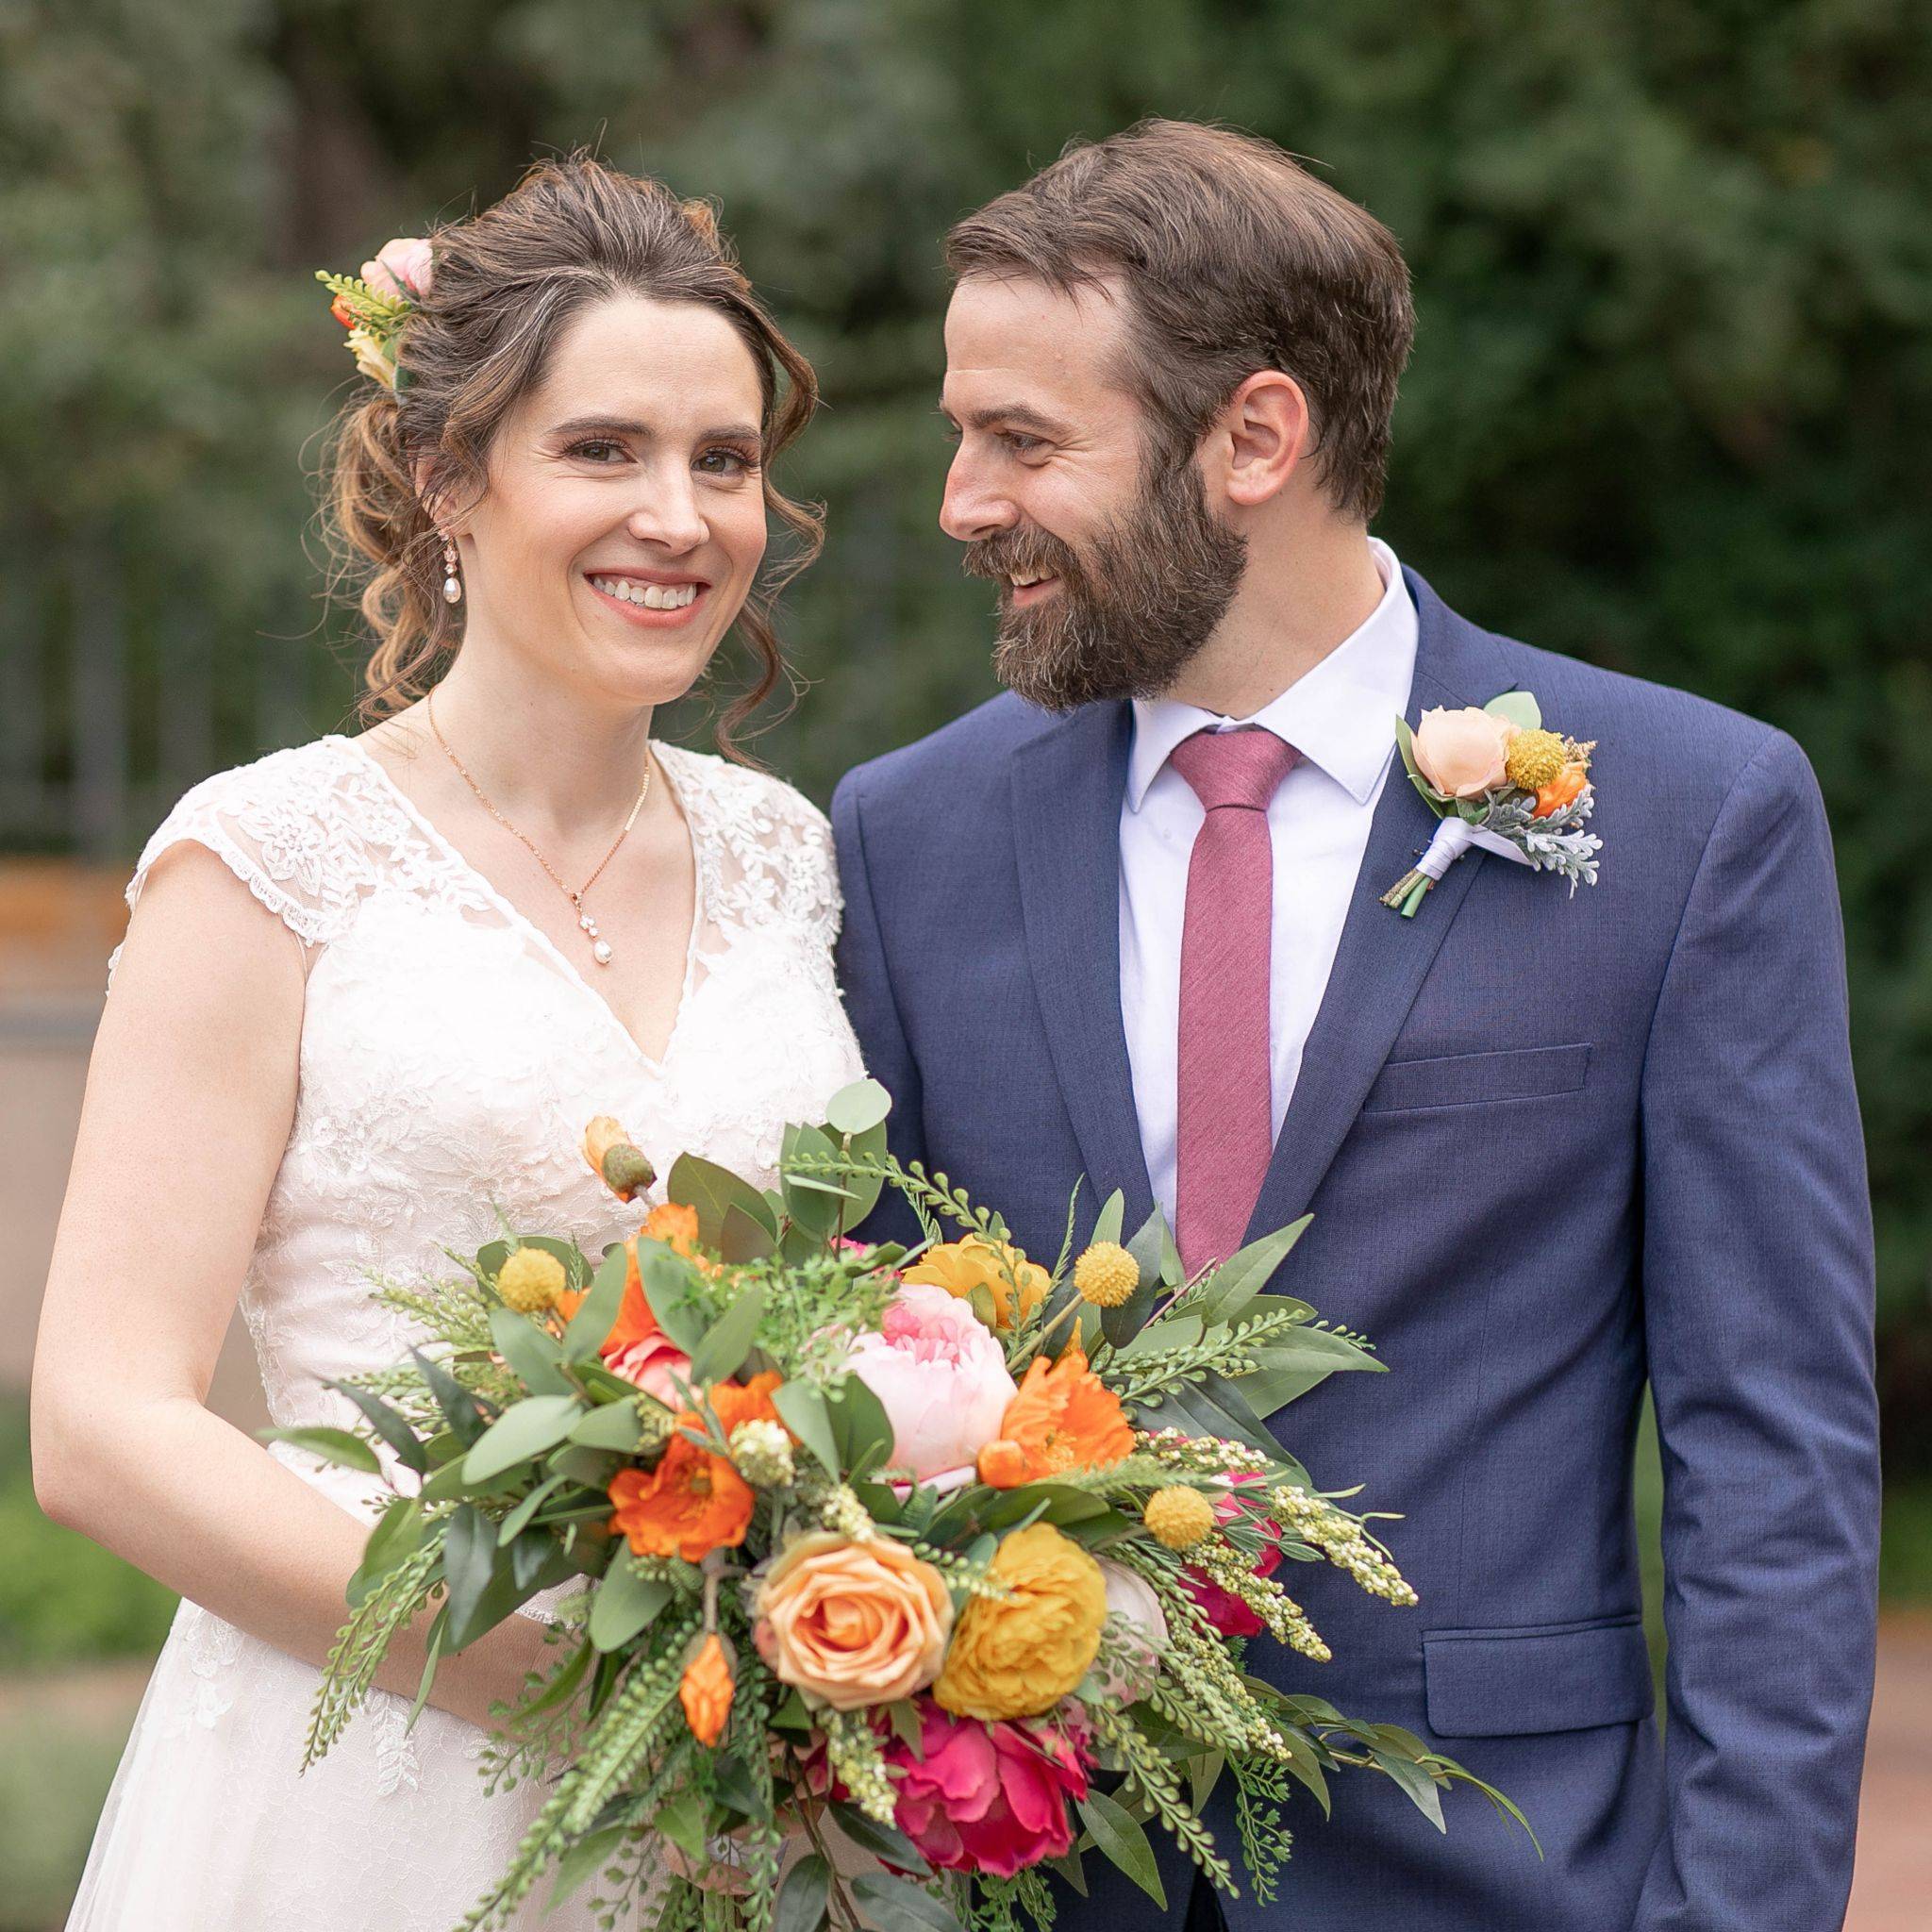 A groom wearing a blue suit with a colorful boutonniere looks at his new bride who is holding a large unstructured bouquet filled with pink peonies, orange roses, yellow ranunculus, eucalyptus and ferns 